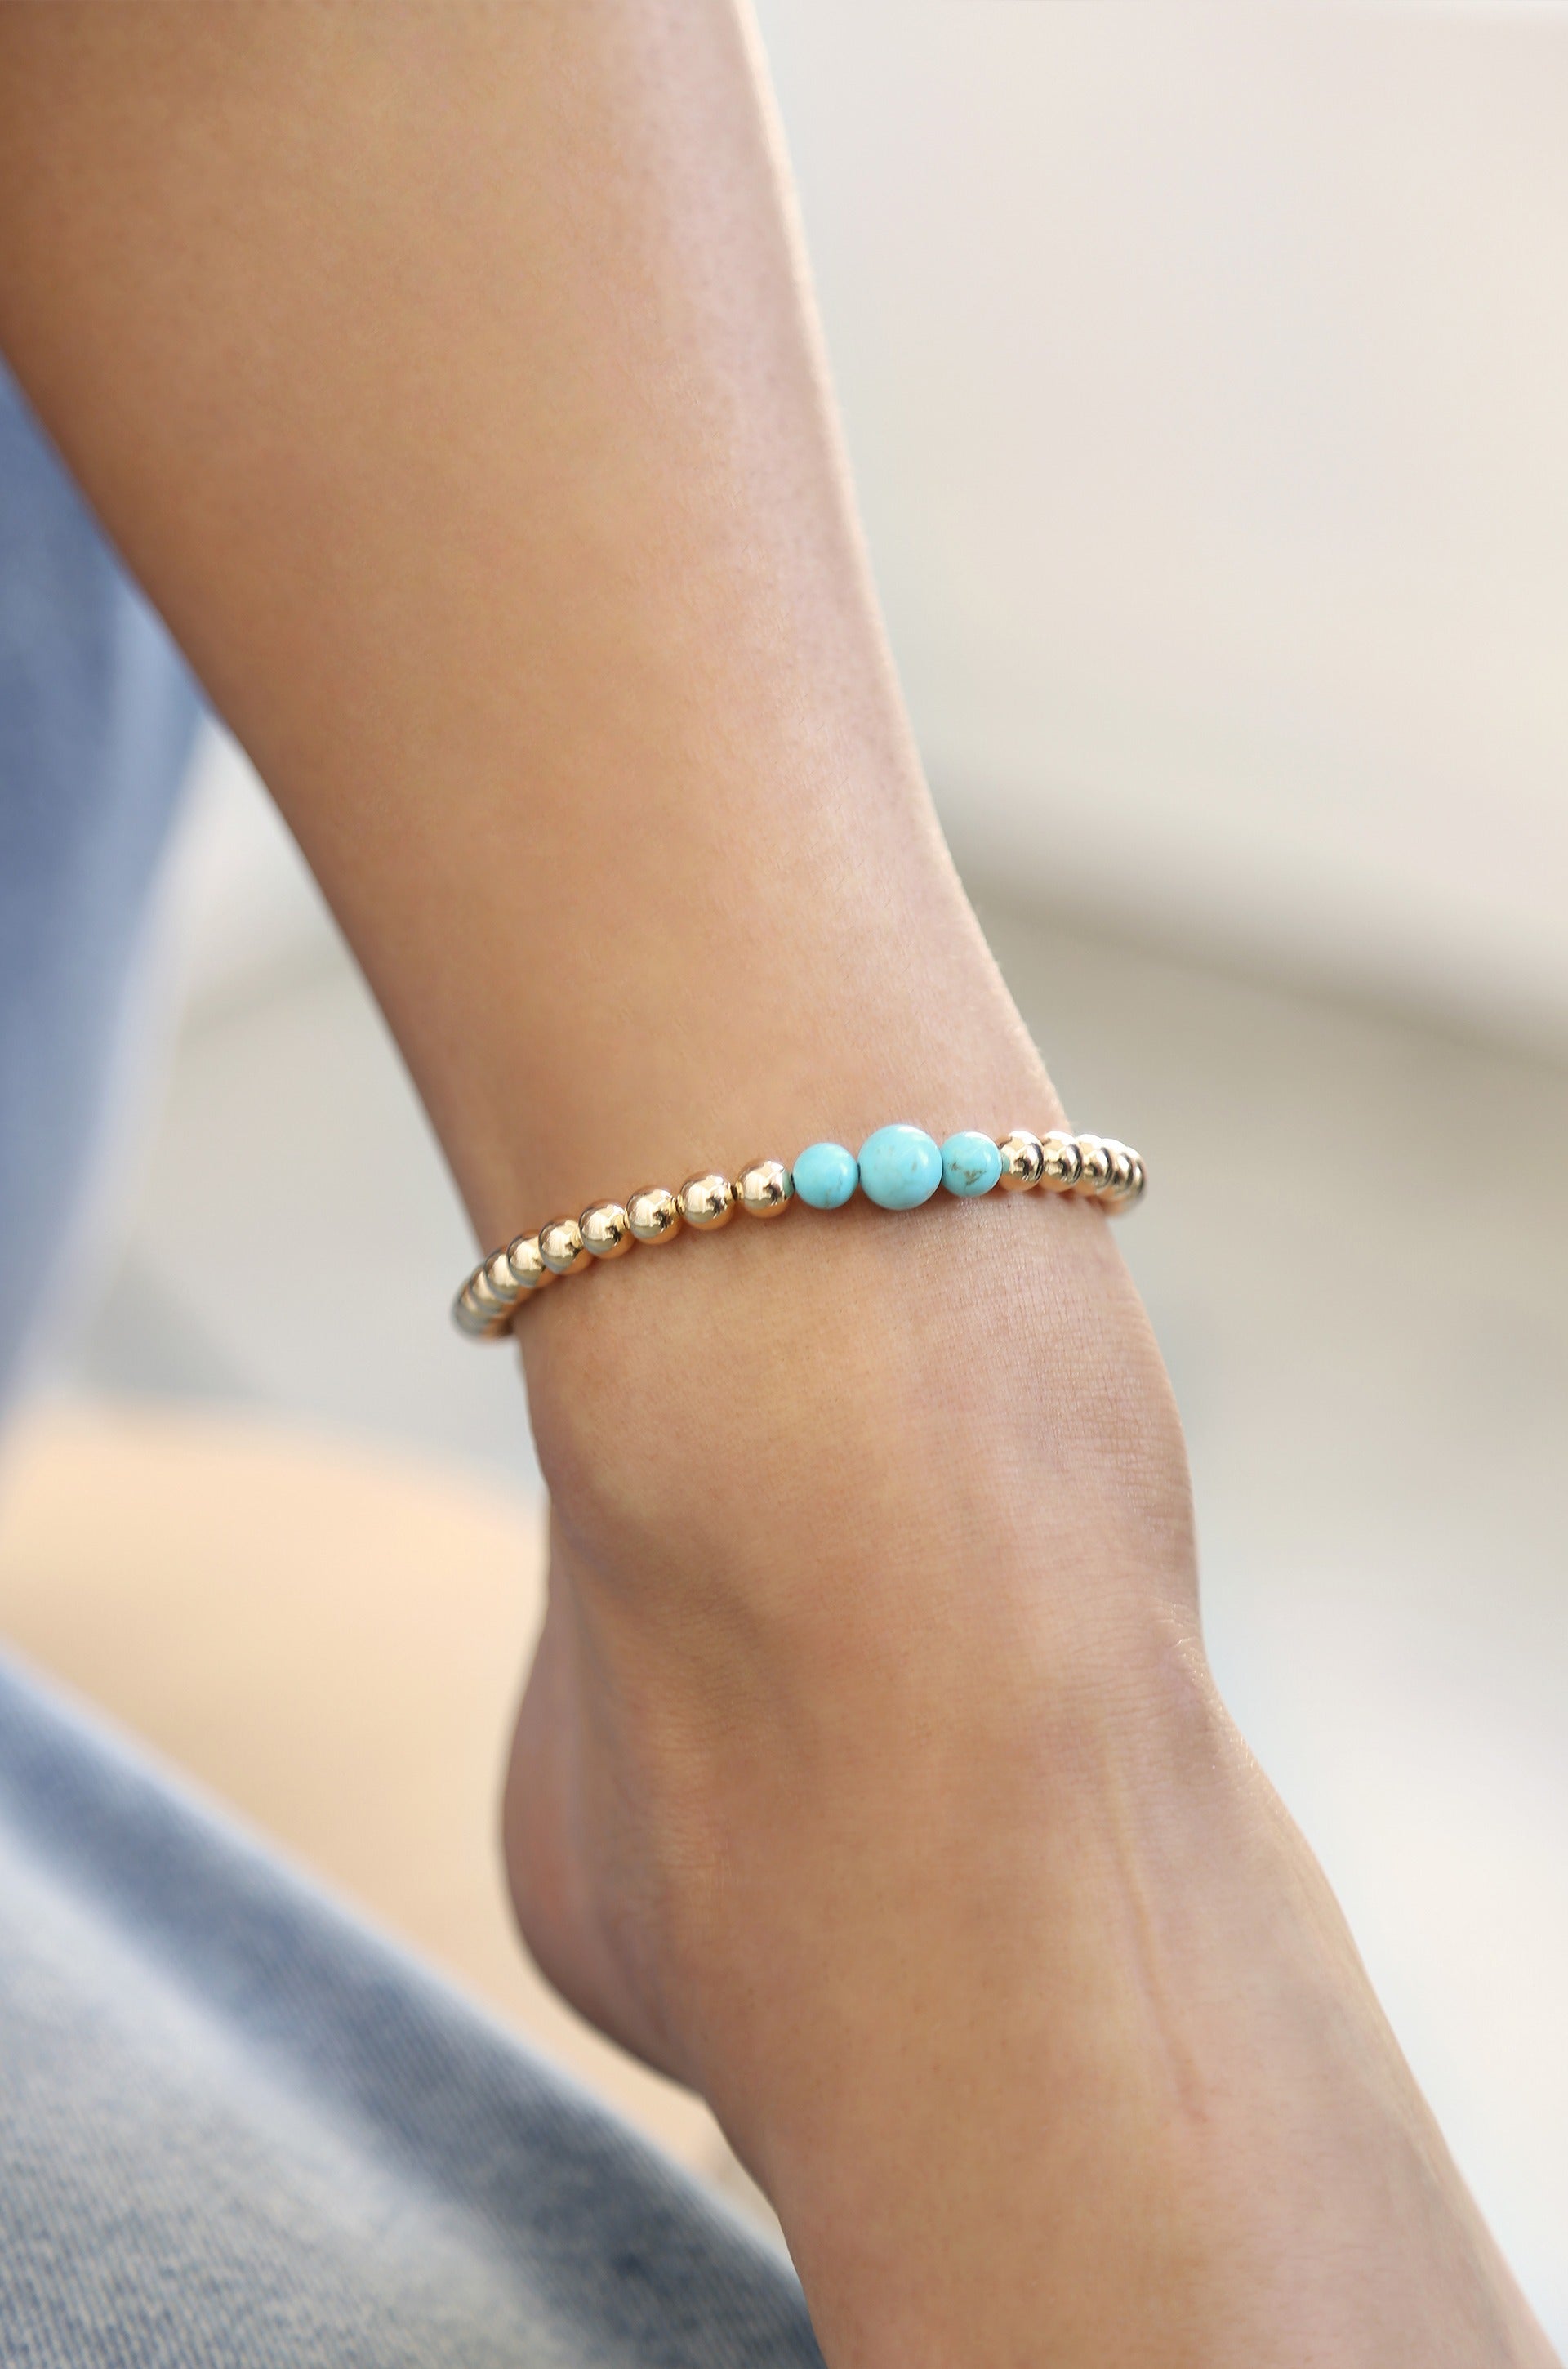 Crystal Ball Anklet in turquoise on a model